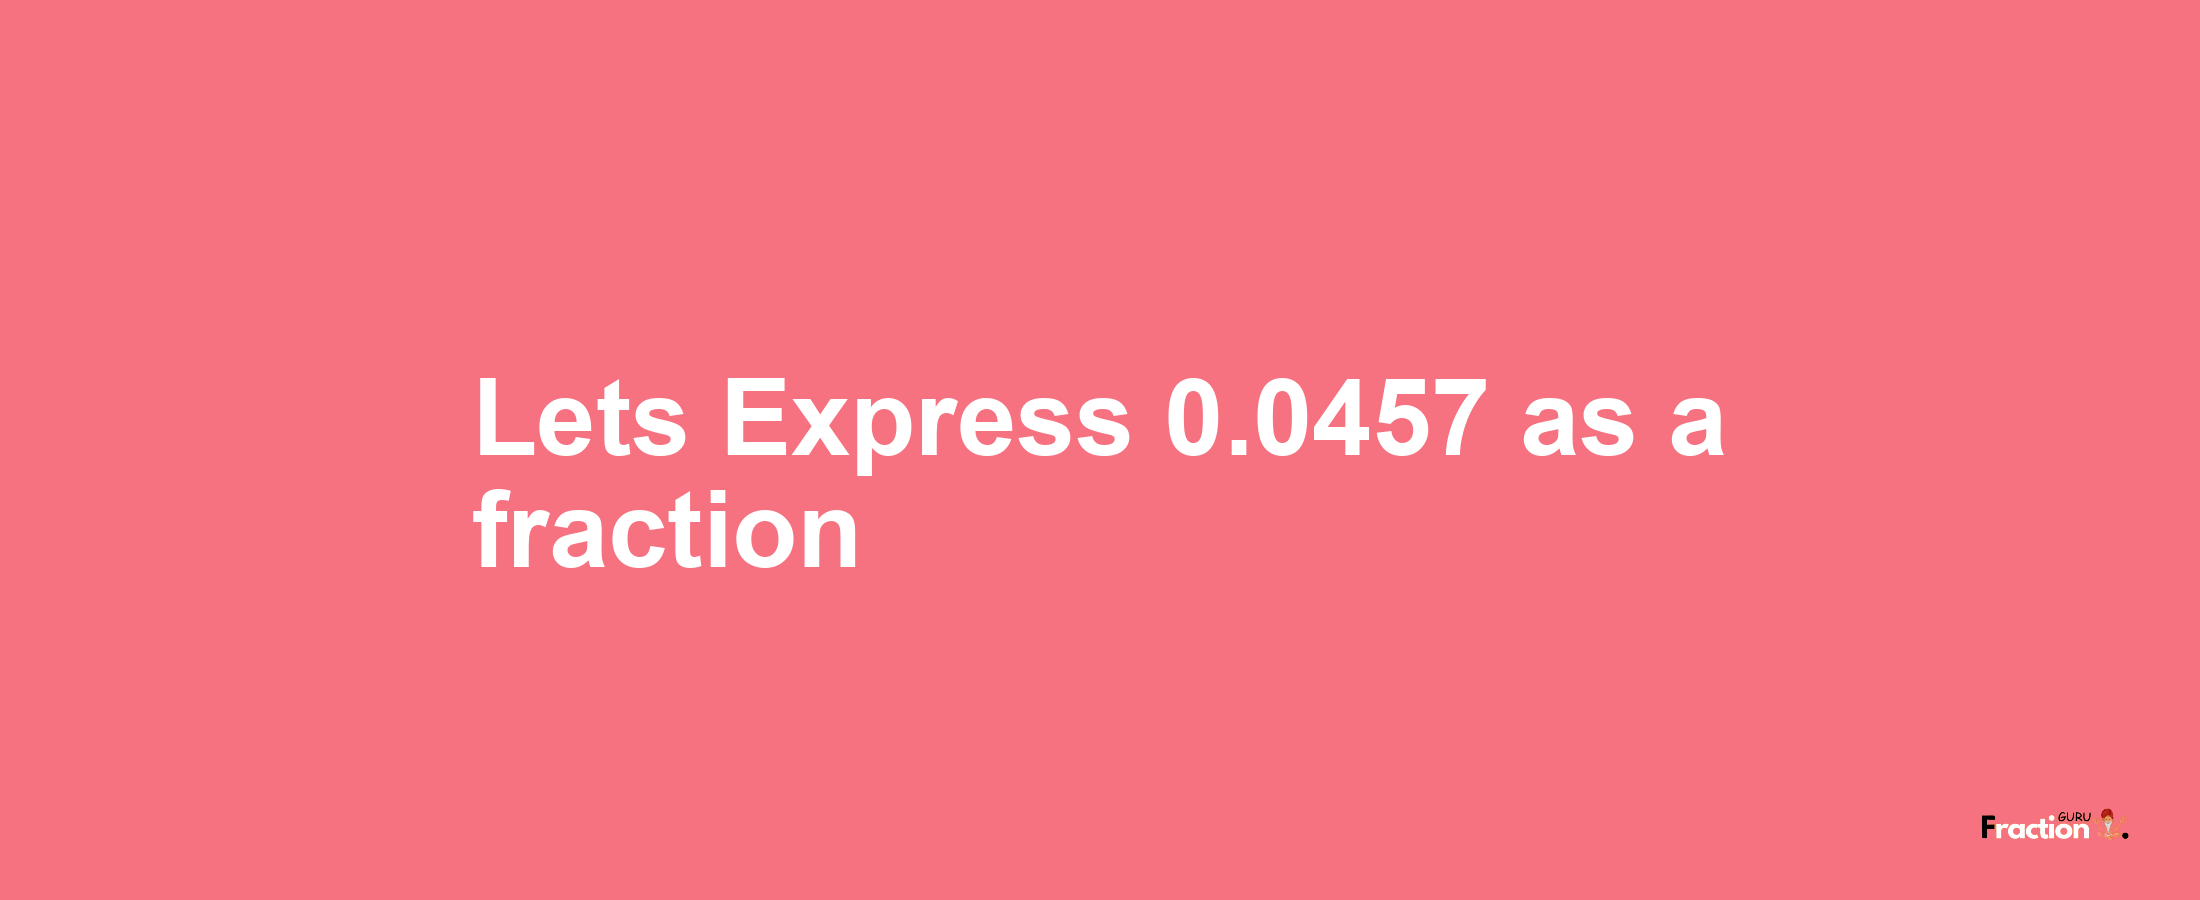 Lets Express 0.0457 as afraction